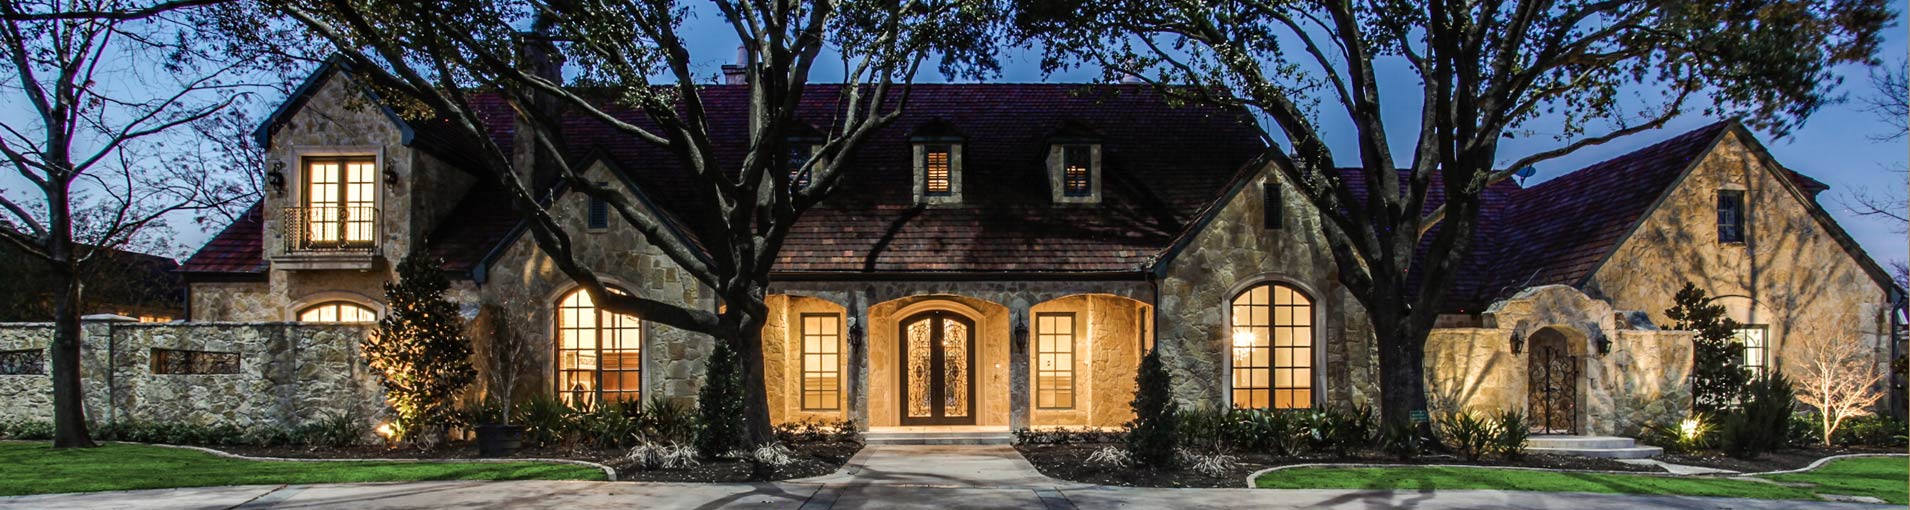 Desco Fine Homes is an award-winning custom home builder in North Dallas. We build custom homes and remodel in areas of North Dallas, including Plano, Bent Tree, Preston Hollow, Bluffview, Lakewood, and the M-Streets. Call us at: 972-381-8995